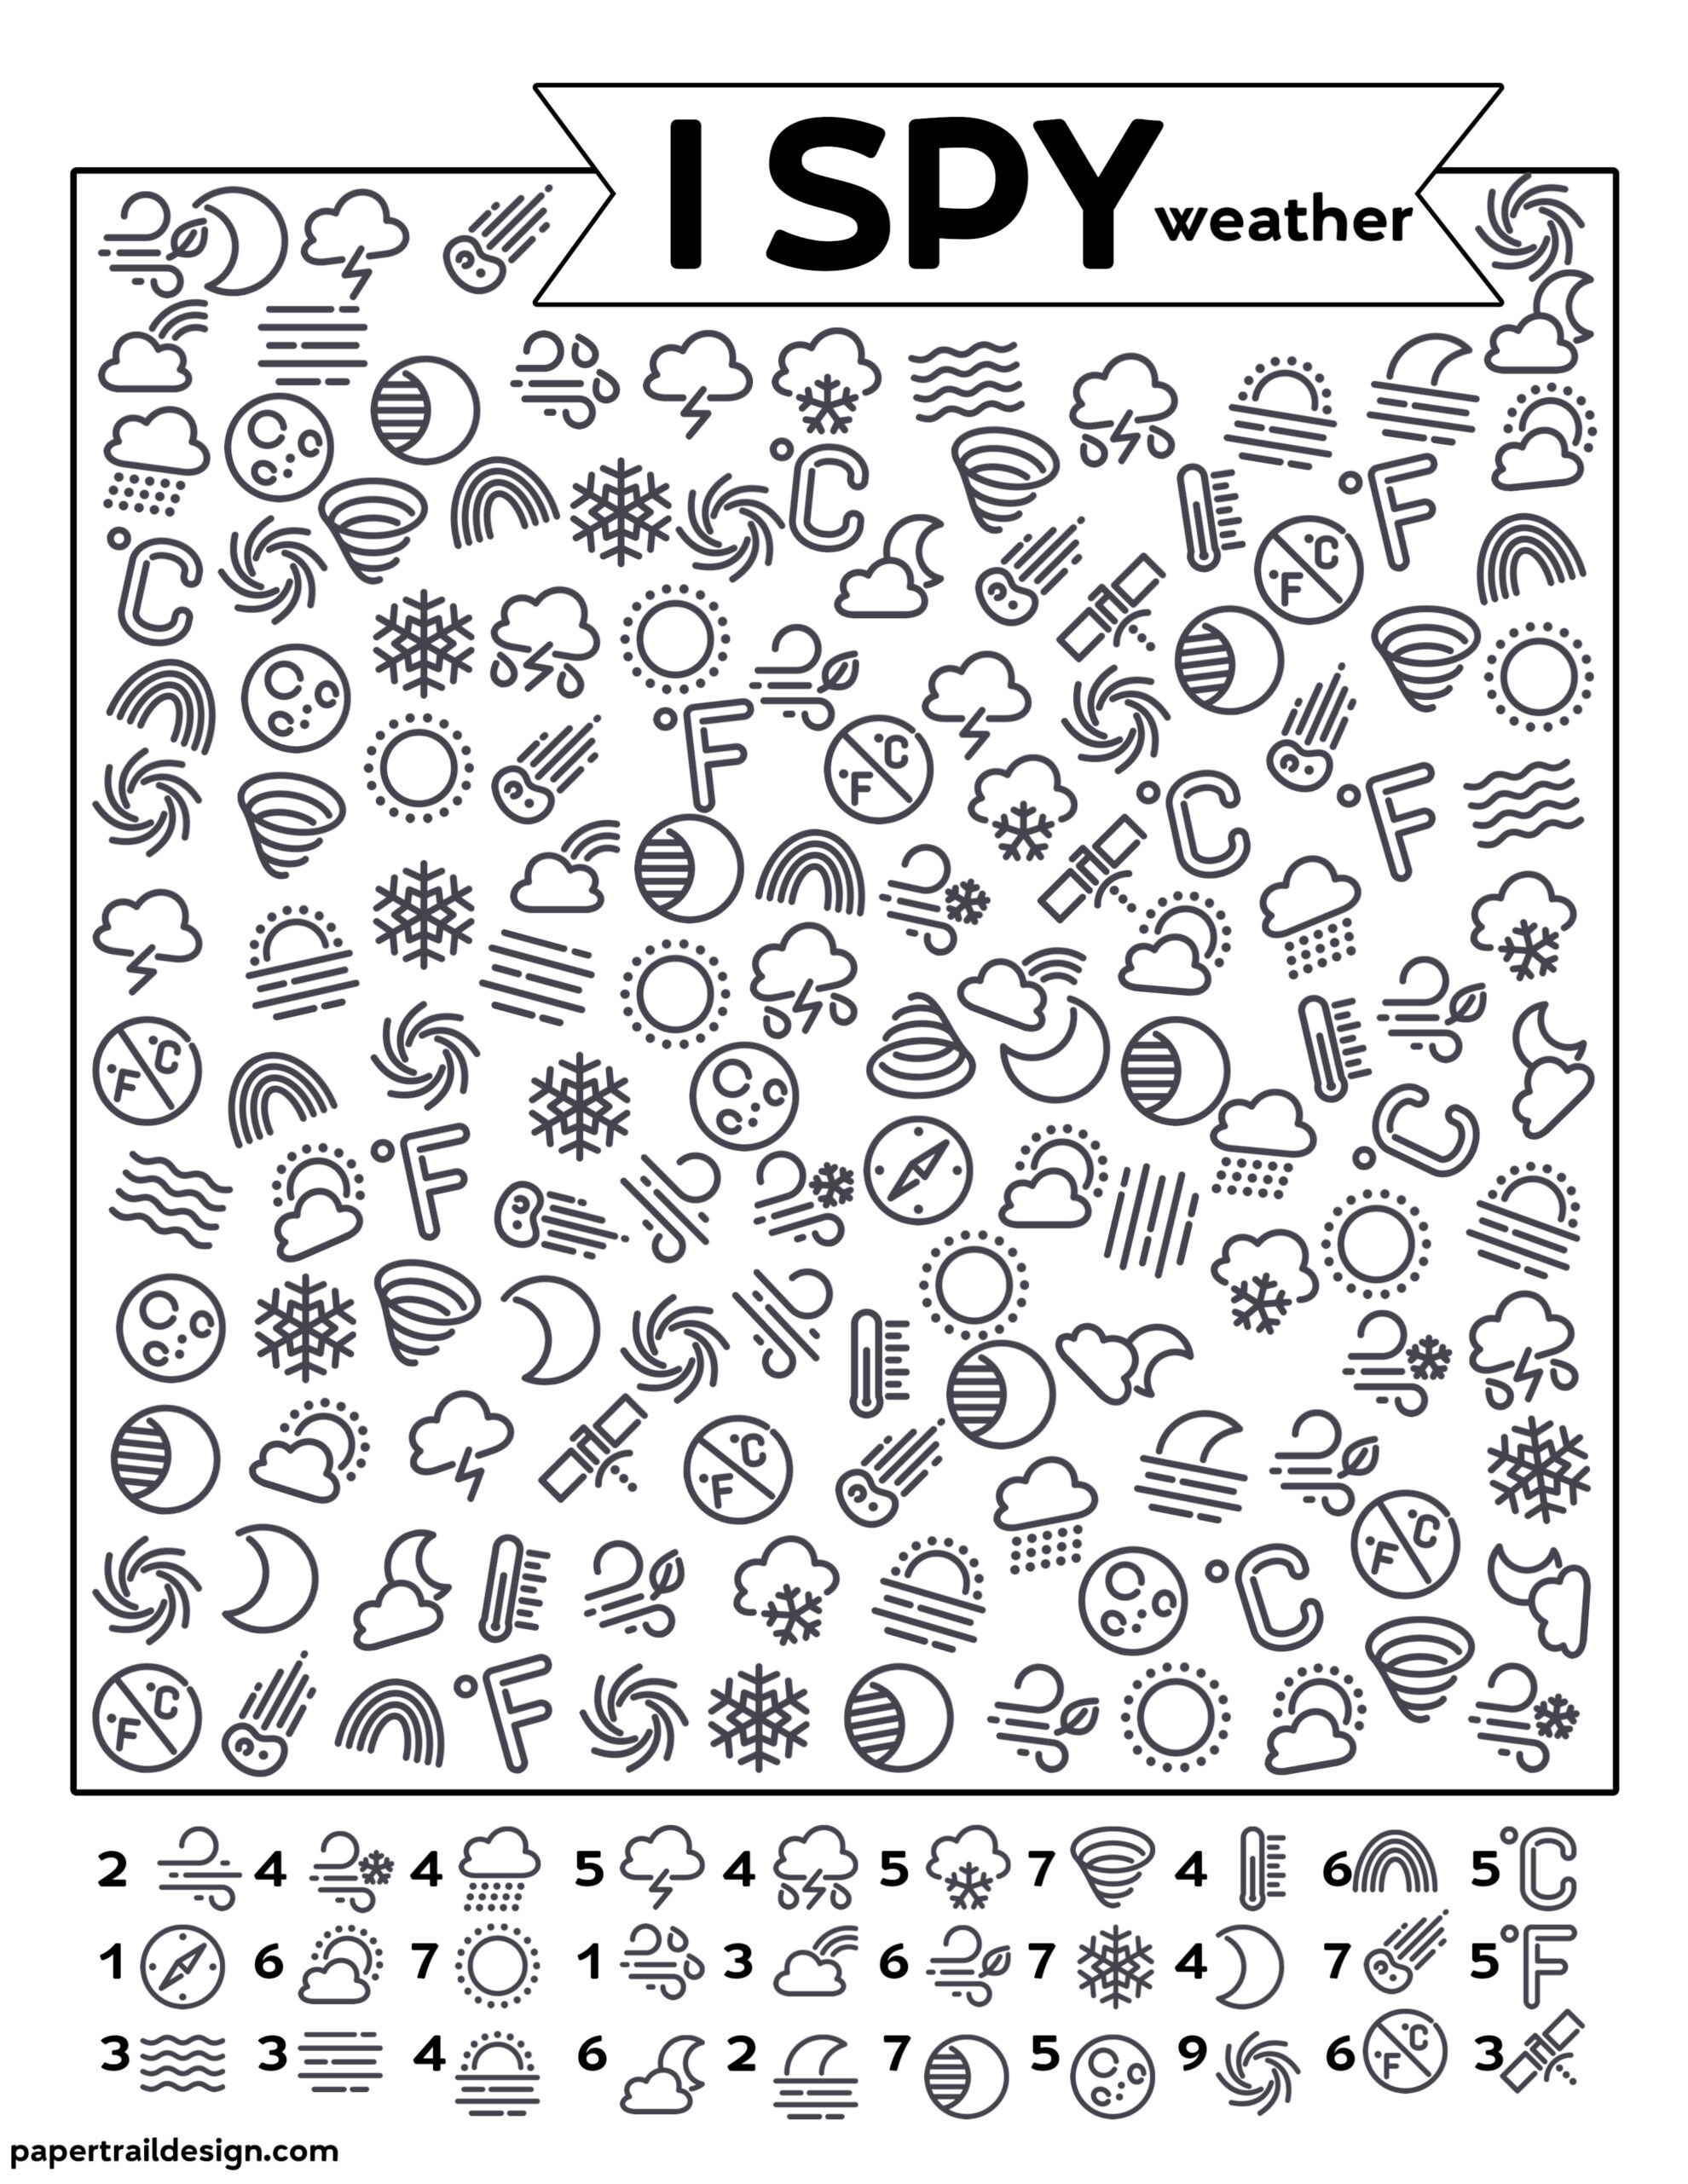 I Spy Weather Coloring Pages   Coloring Cool